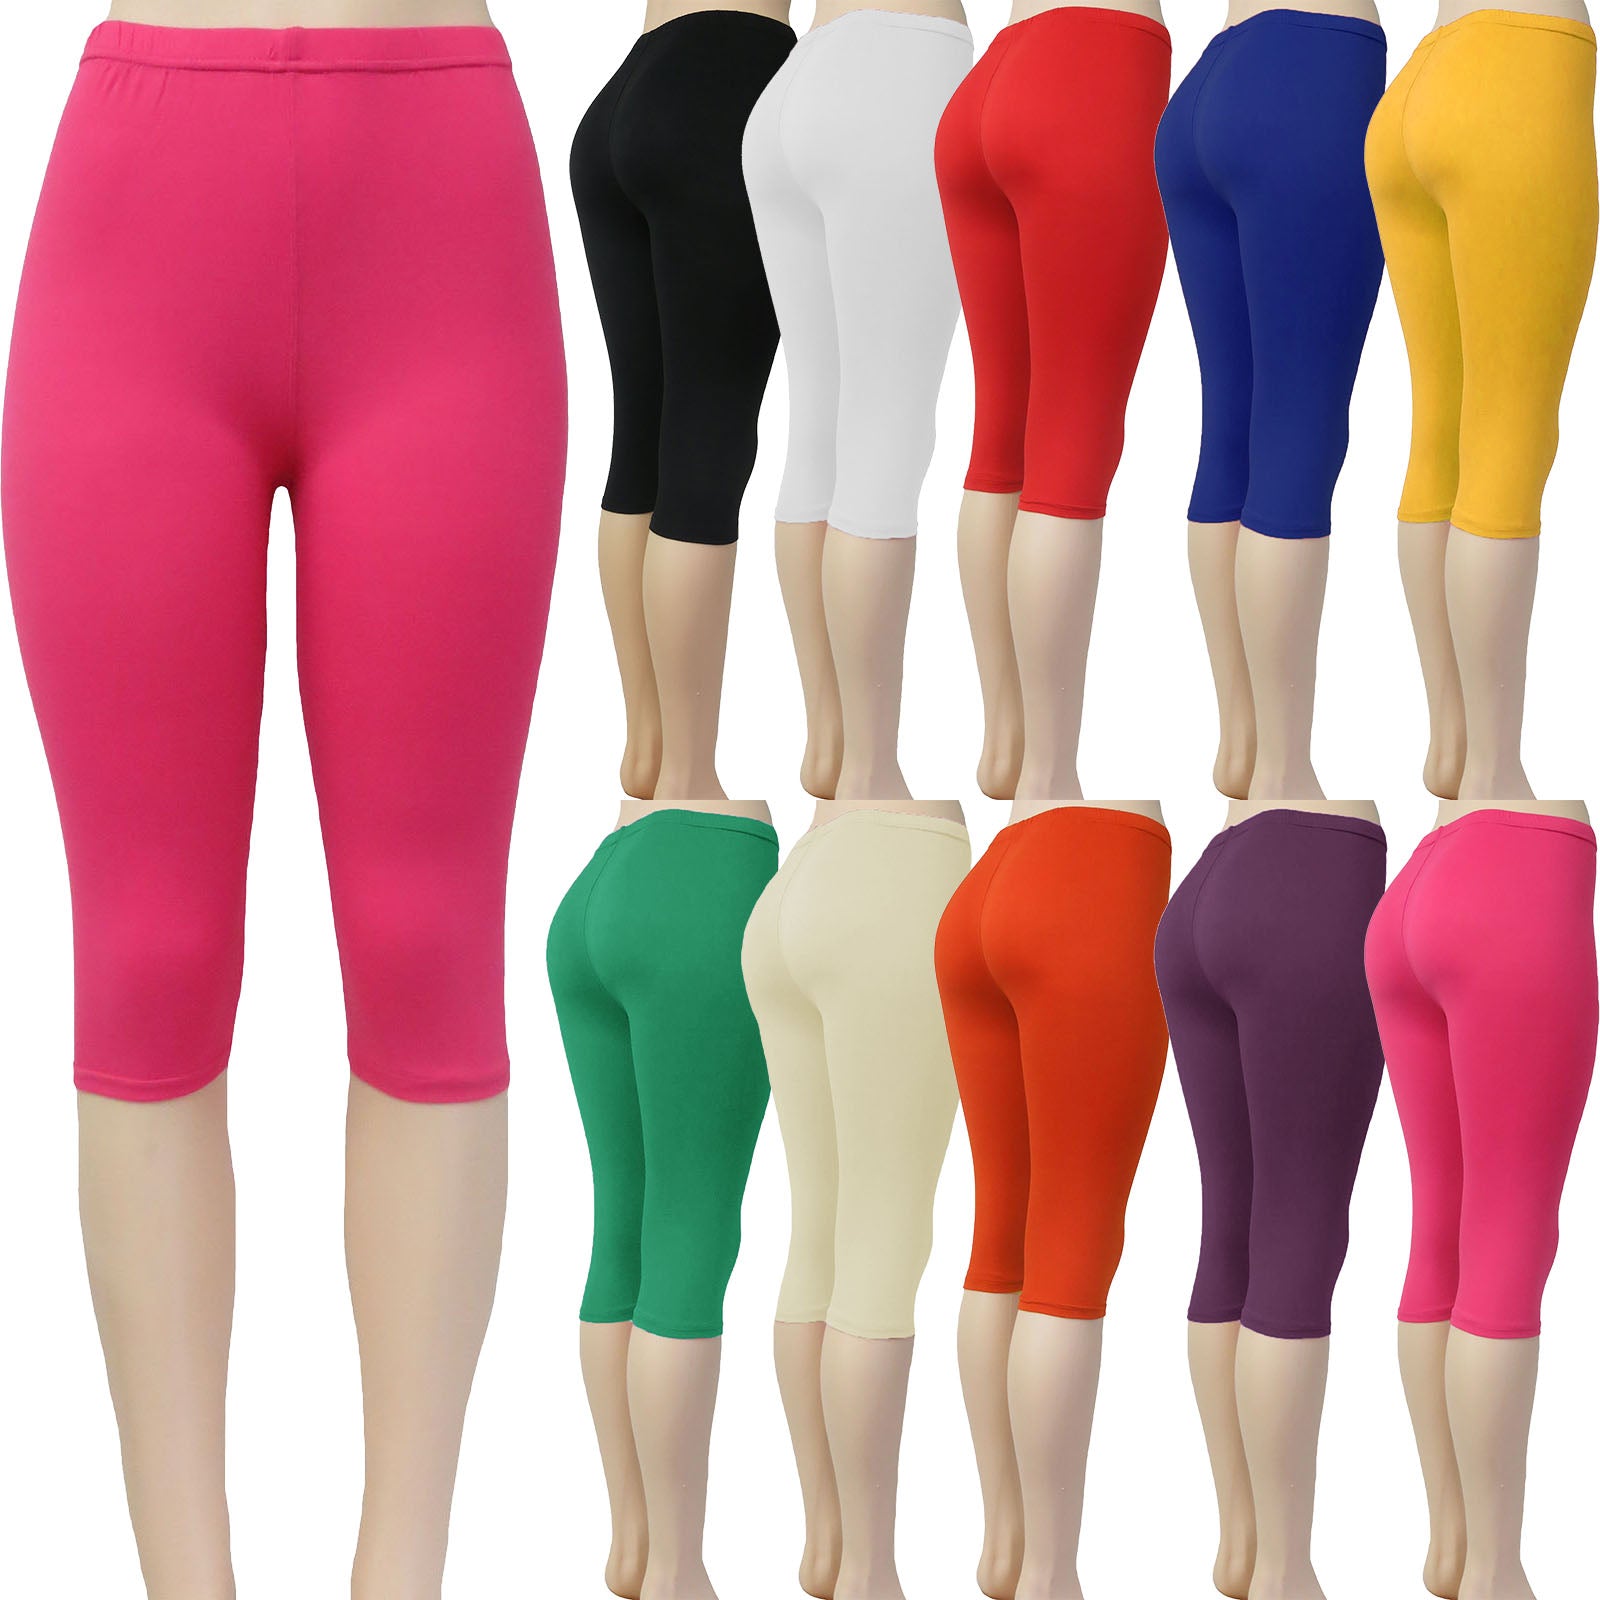 FITINCLINE Women's Leggings Buttery Soft Yoga Pant Gym Fitness No Front  Seam | eBay